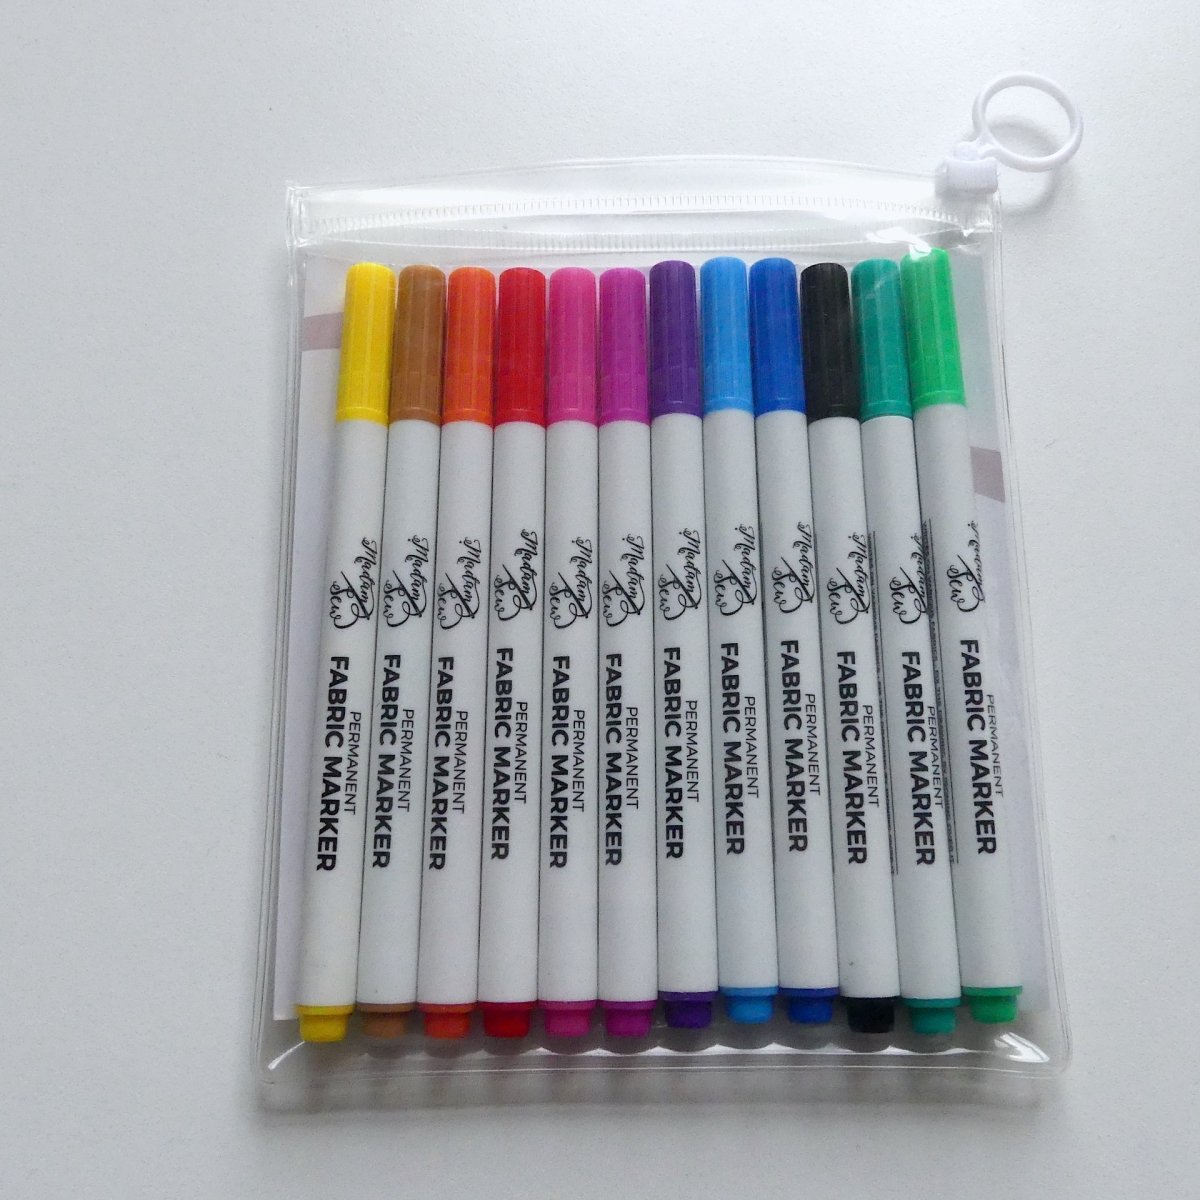 Ten colors of permanent fabric markers in a transparent pouch